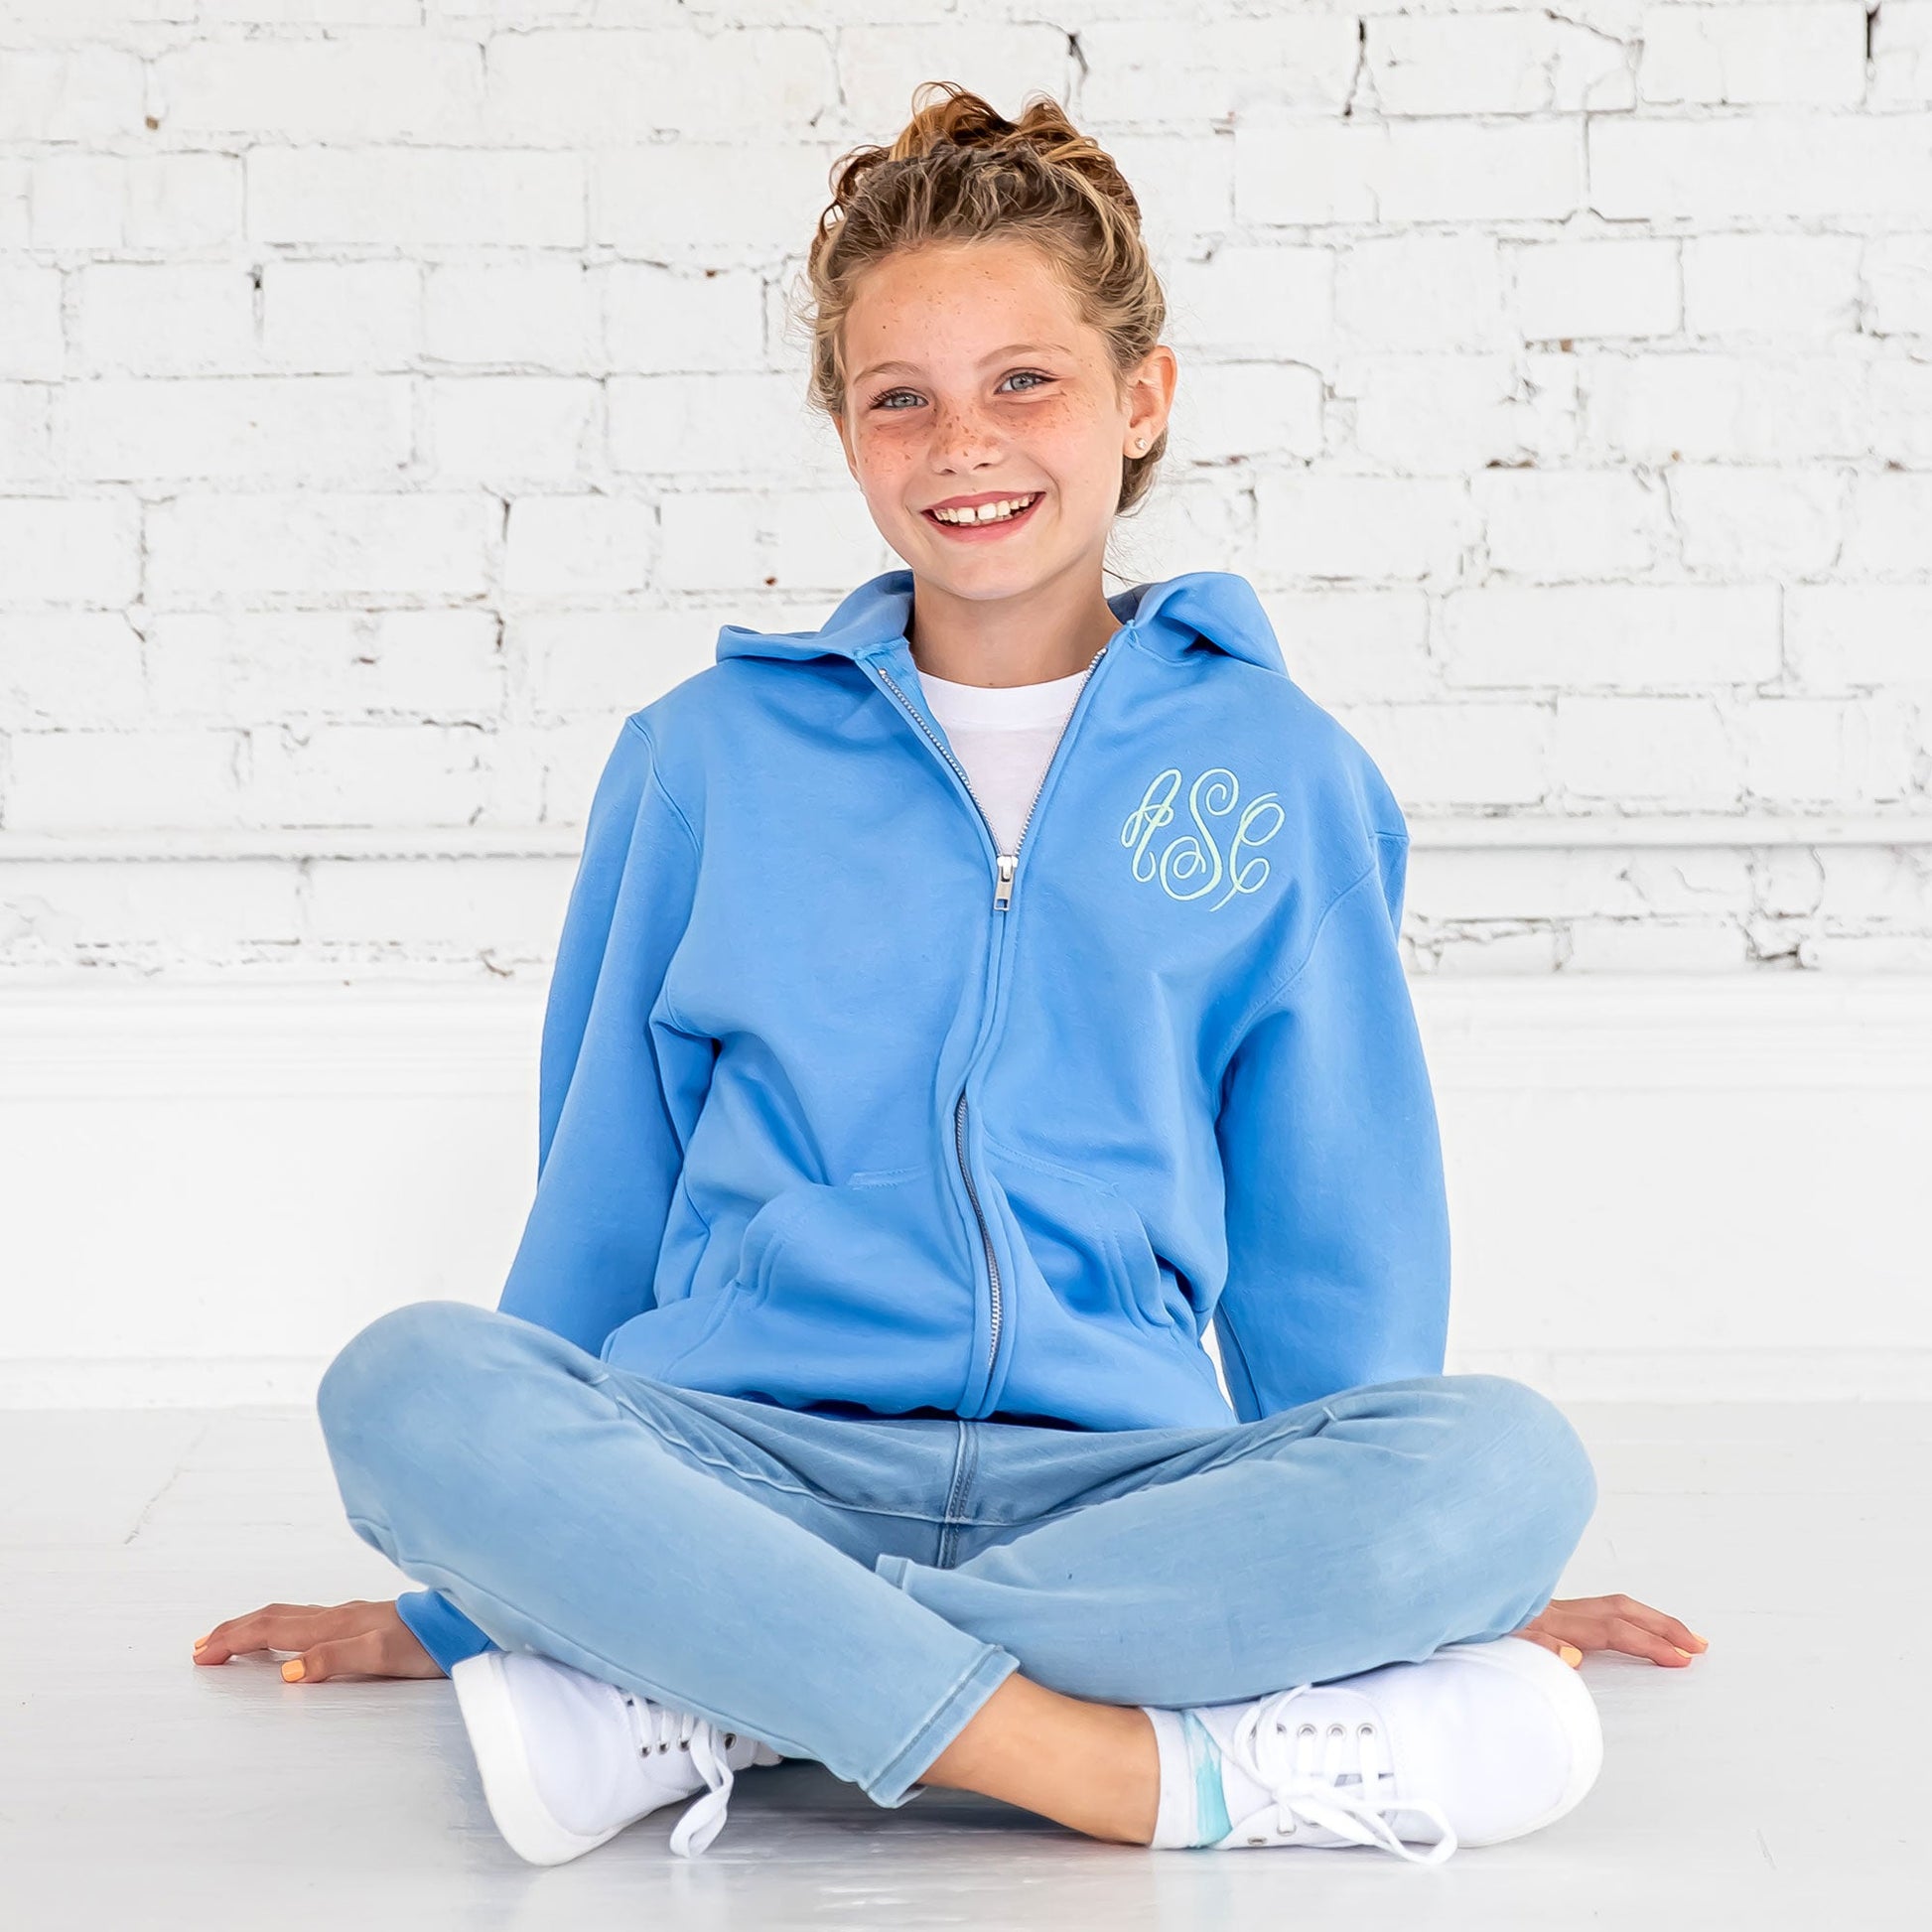 young girl sitting on the floor wearing jeans, sneakers, and a full zip hooded sweatshirt jacket with personalized monogram embroidery